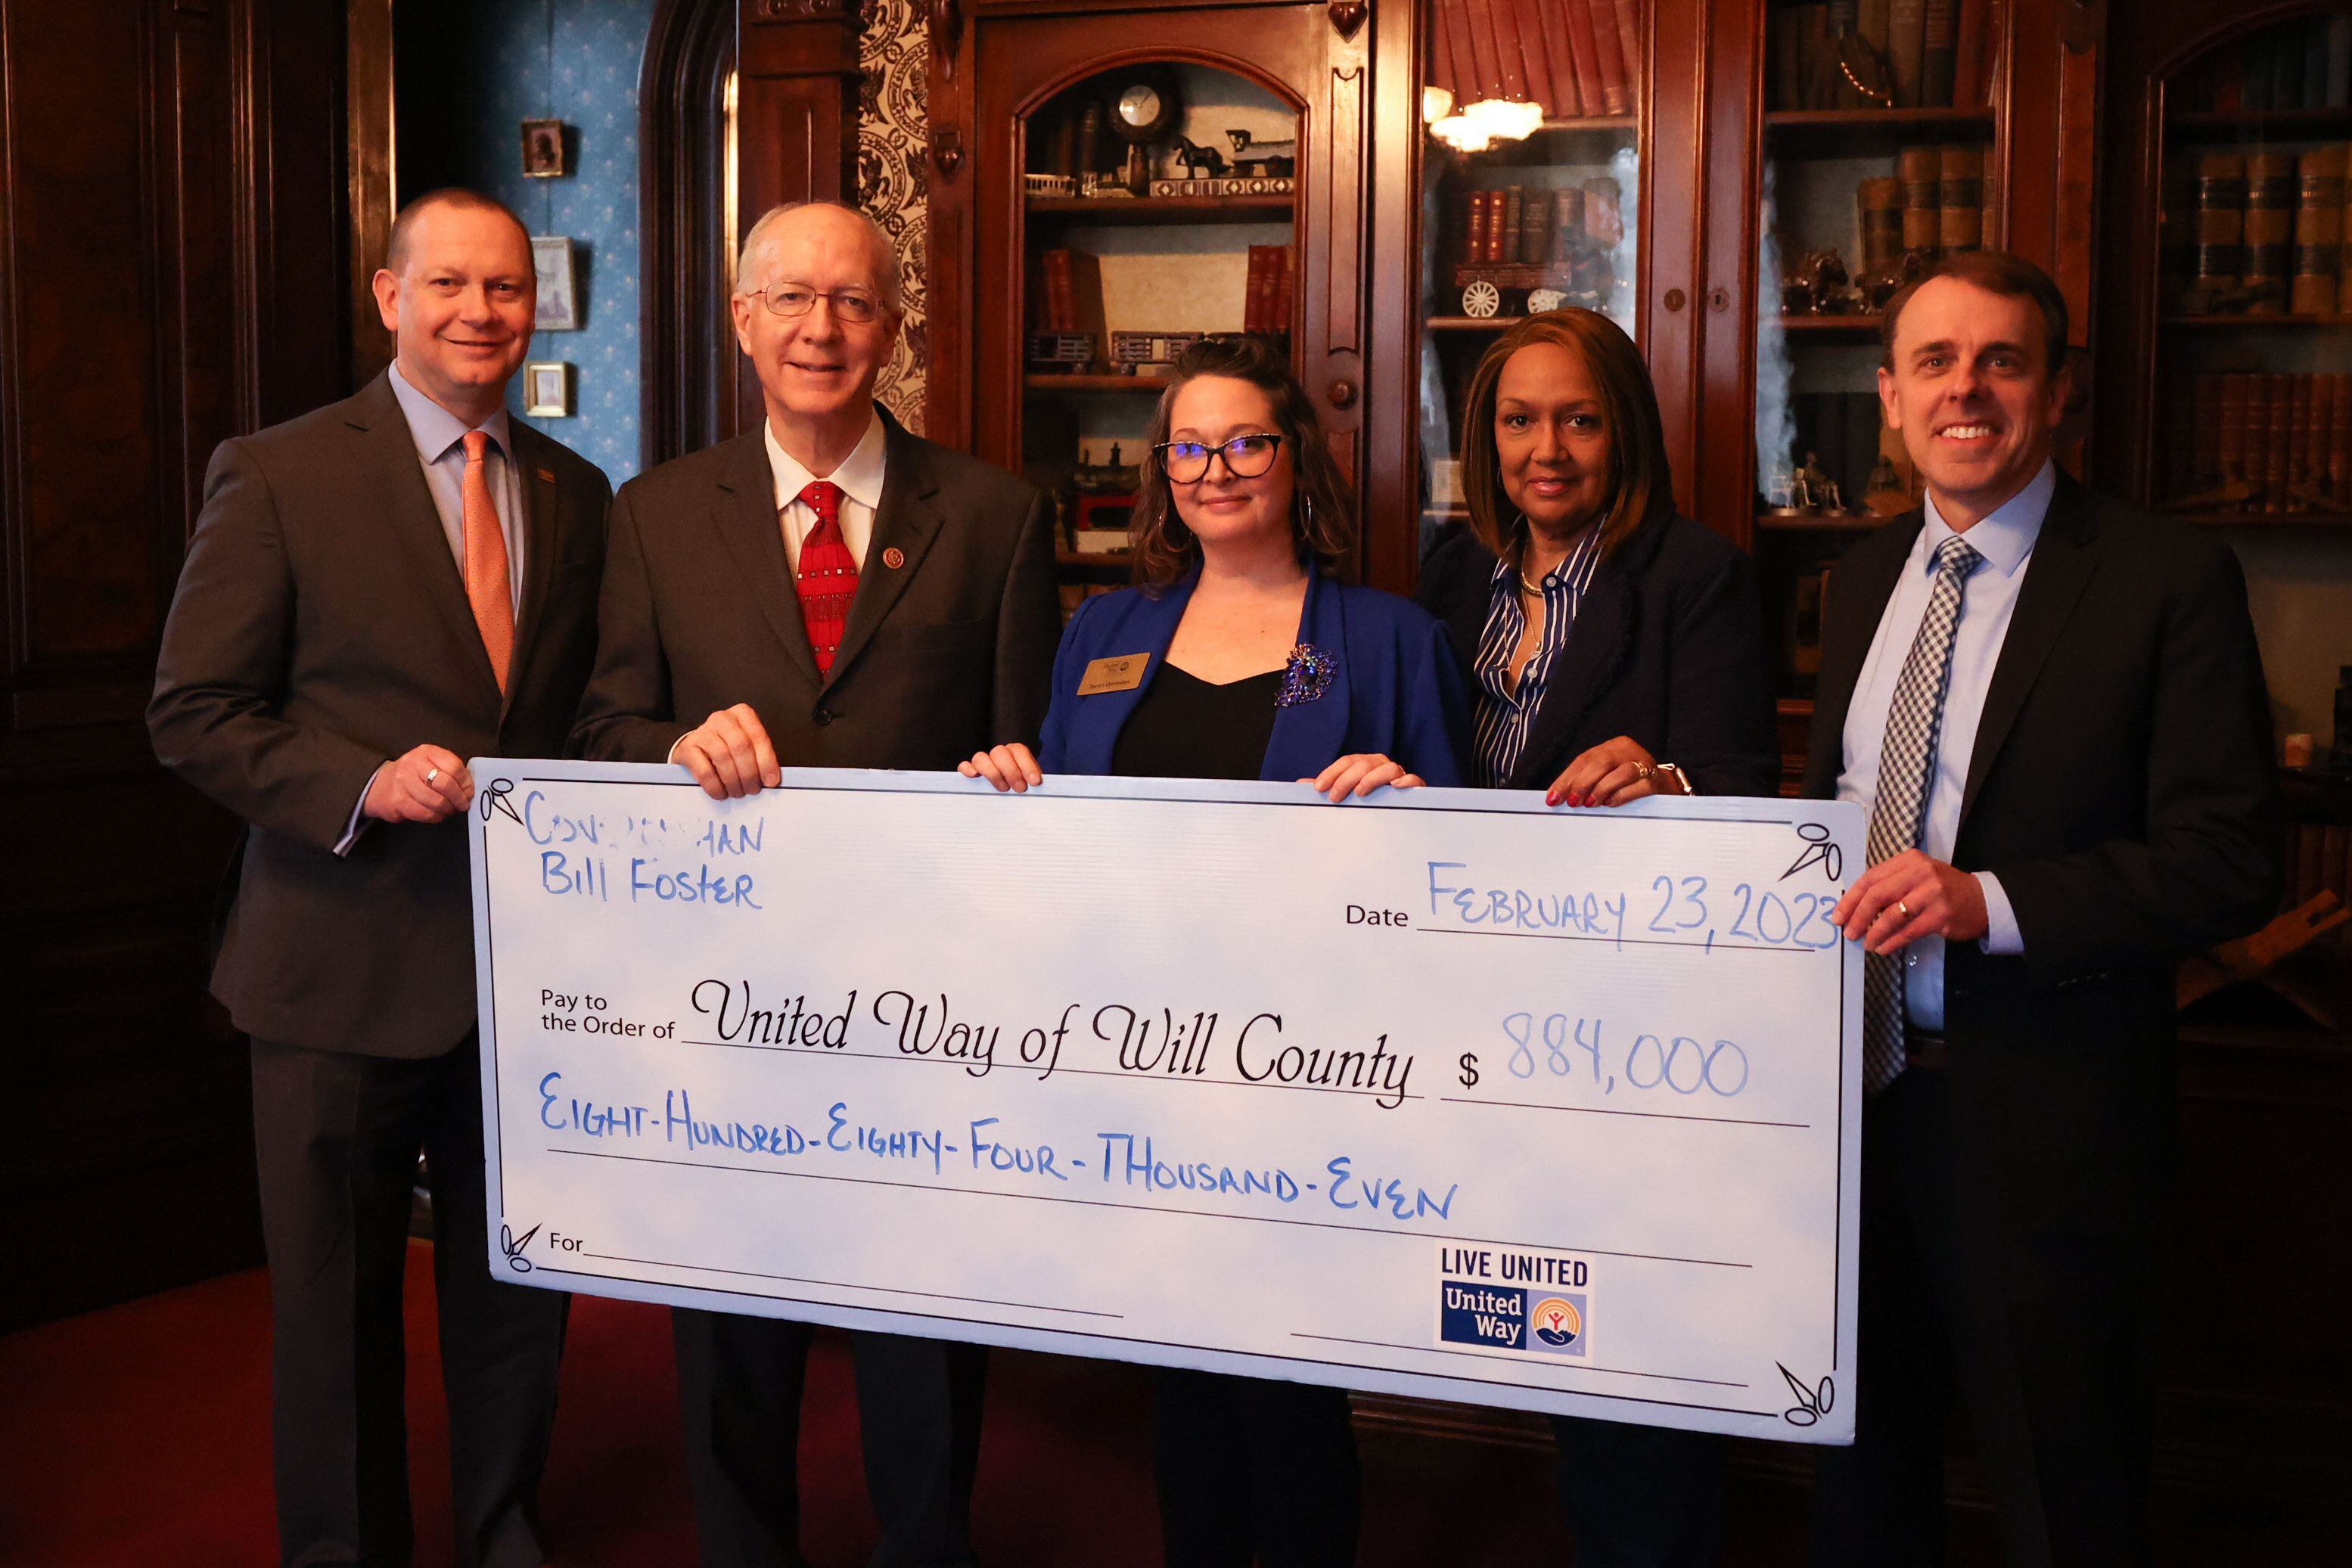 Billy Hearth, United Way Chair of Board, Congressman Bill Foster (D-Ill), Sarah Oprzedek, United Way of Will County CEO, Leslie Rienzie, Director of HR Willy County Circuit Court, and Tom Klisiewicz, founder and President of Smart HP, pose with a $884k check for United Way of Will County at a United Way private event at the Jacob Henry Mansion on Thursday, February 23rd, 2023 in Joliet.